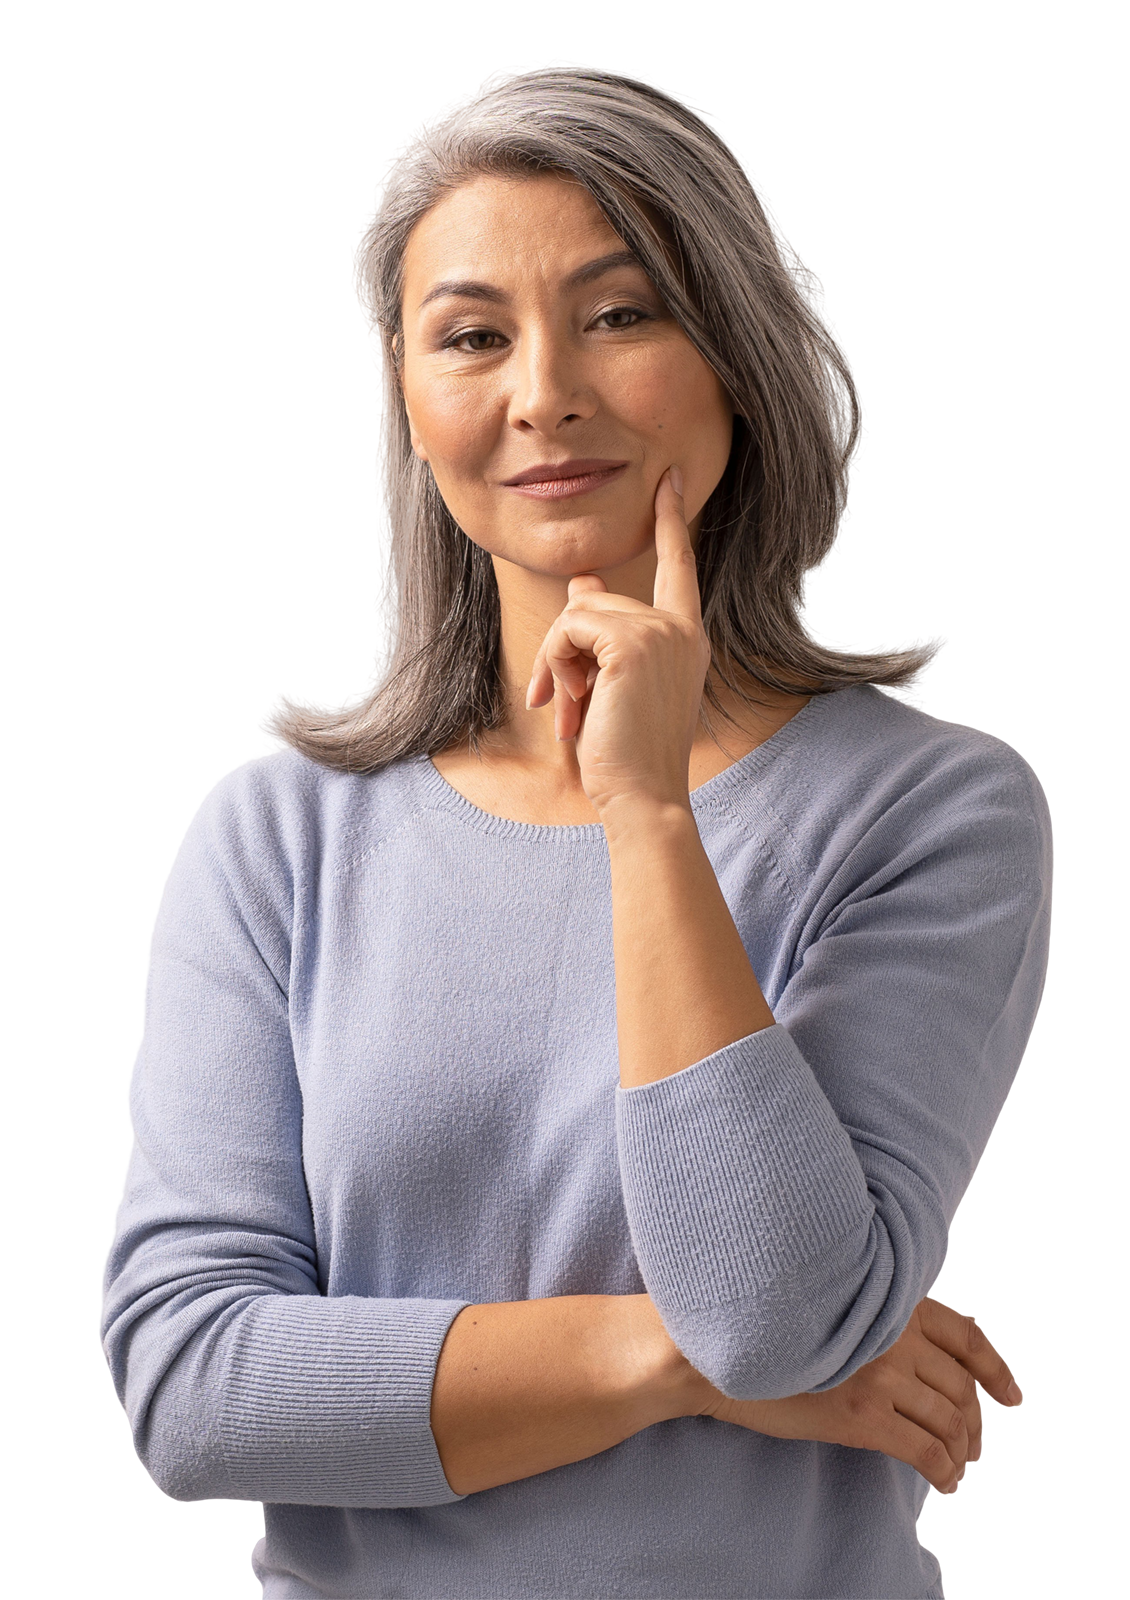 Asian Women PNG Image High Quality PNG Image